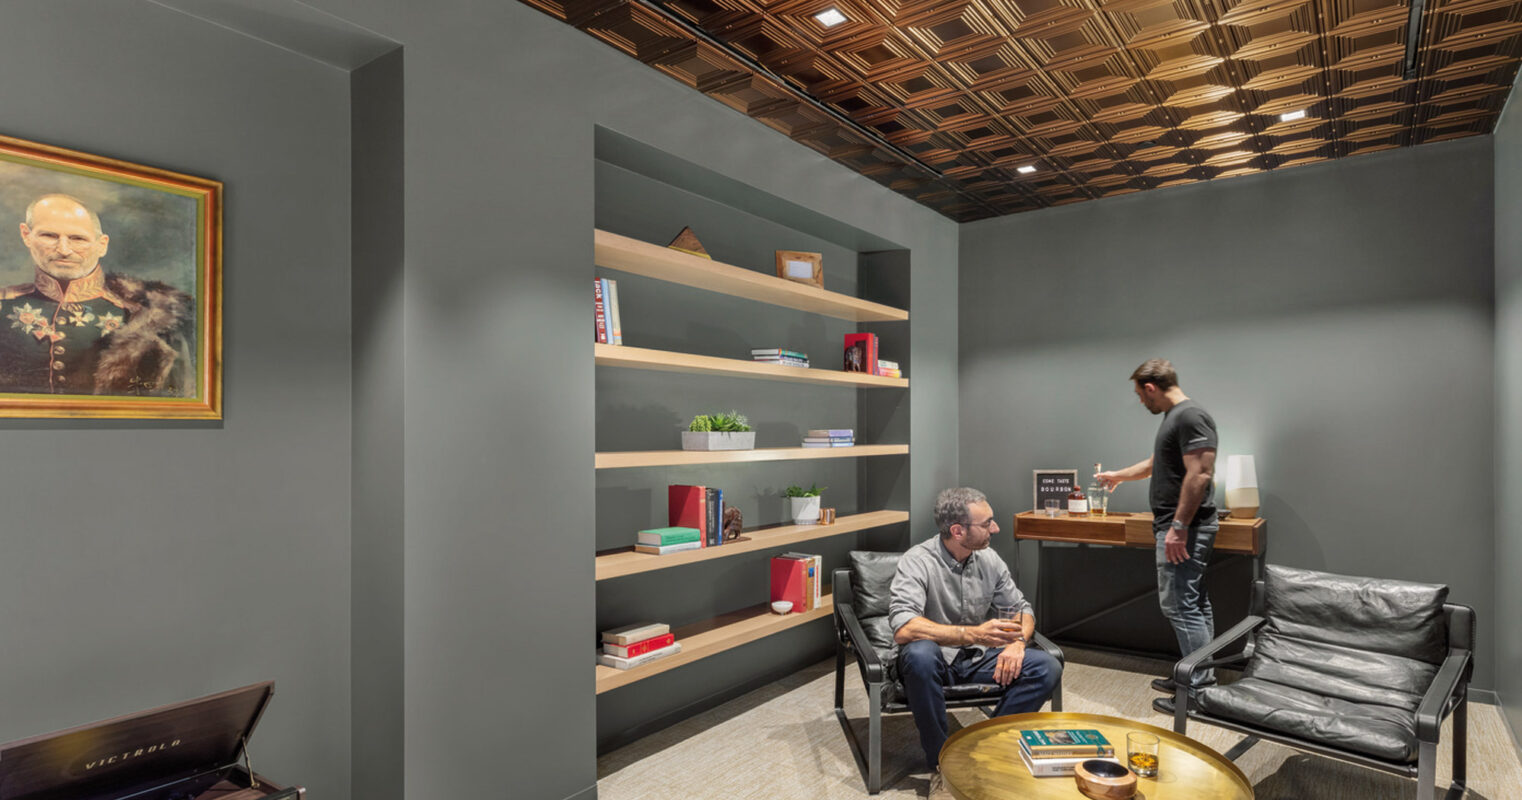 Modern office space with two individuals features charcoal-gray walls contrasting with a geometric copper ceiling. A built-in bookshelf, black leather chairs, and a central brass coffee table emphasize a sophisticated, contemporary aesthetic. A classic portrait adds a traditional touch to the room's sleek design.